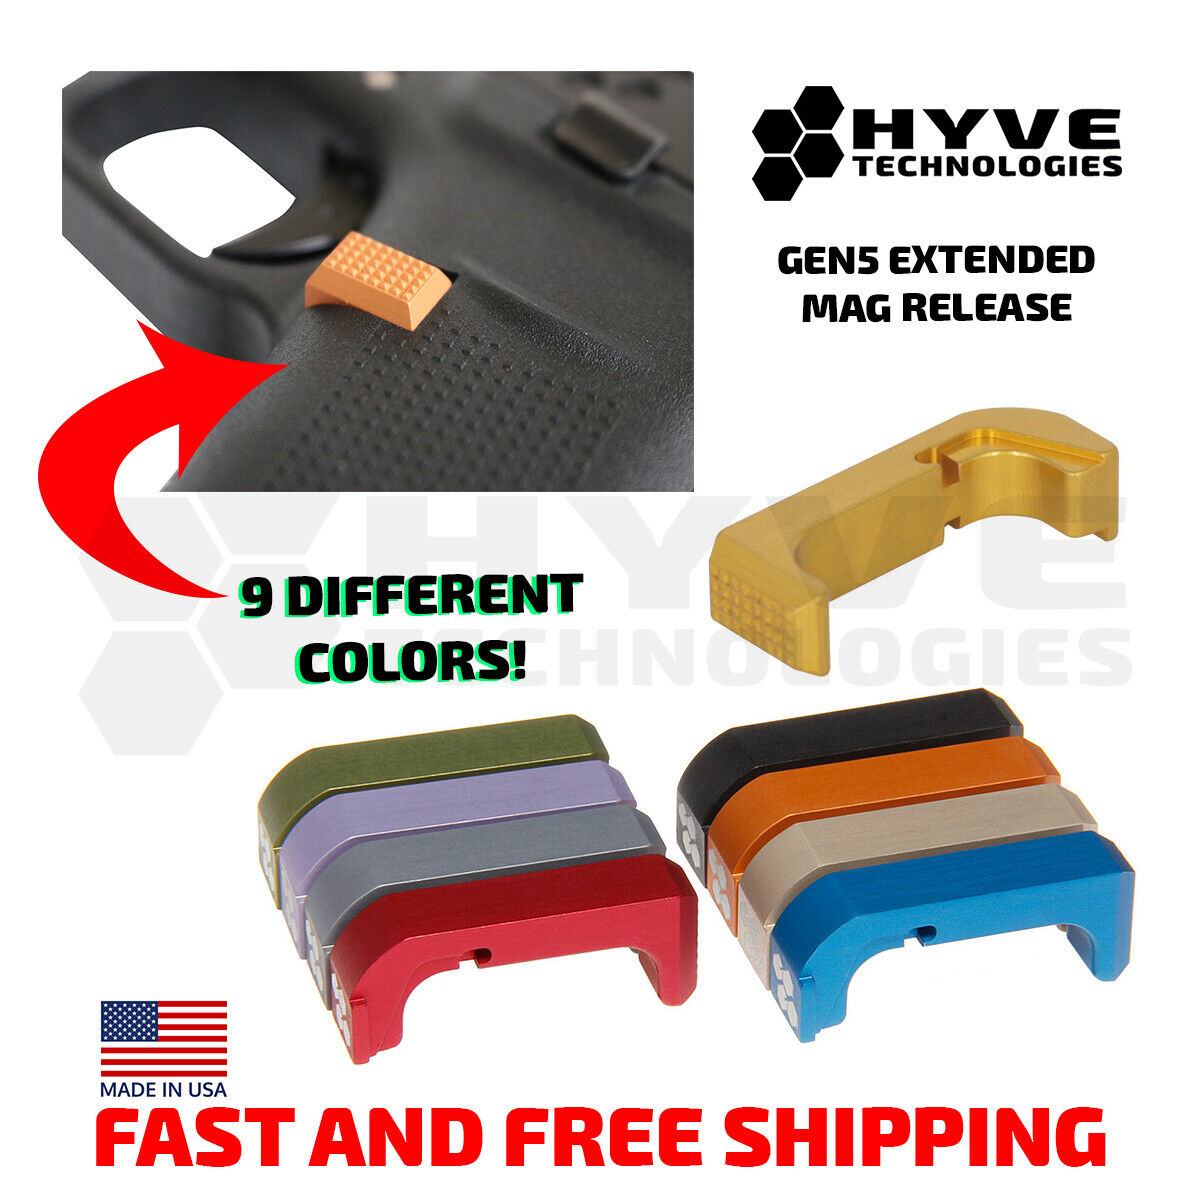 Hyve Technologies Extended Mag Release for the Gen 5 Glock